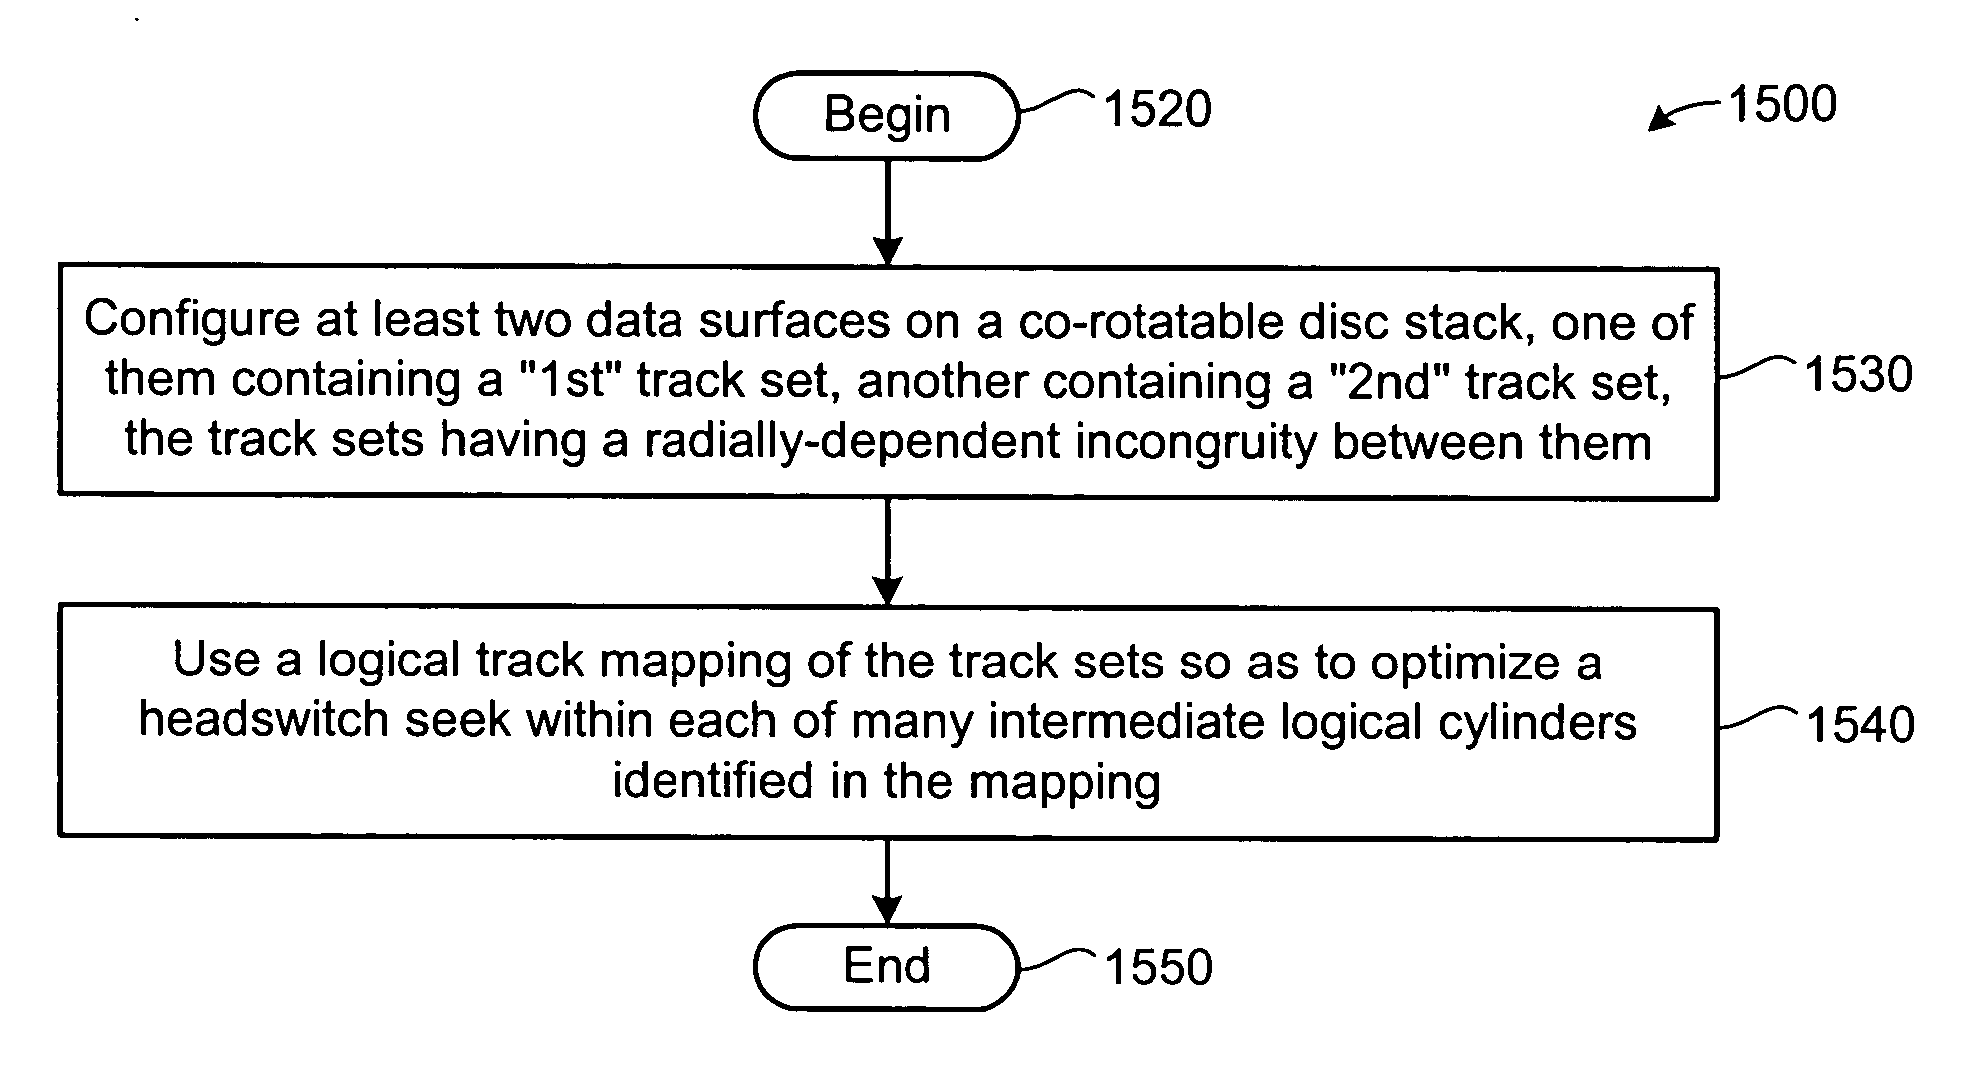 Logical mapping for improved head switching between corresponding tracks in a data handling device